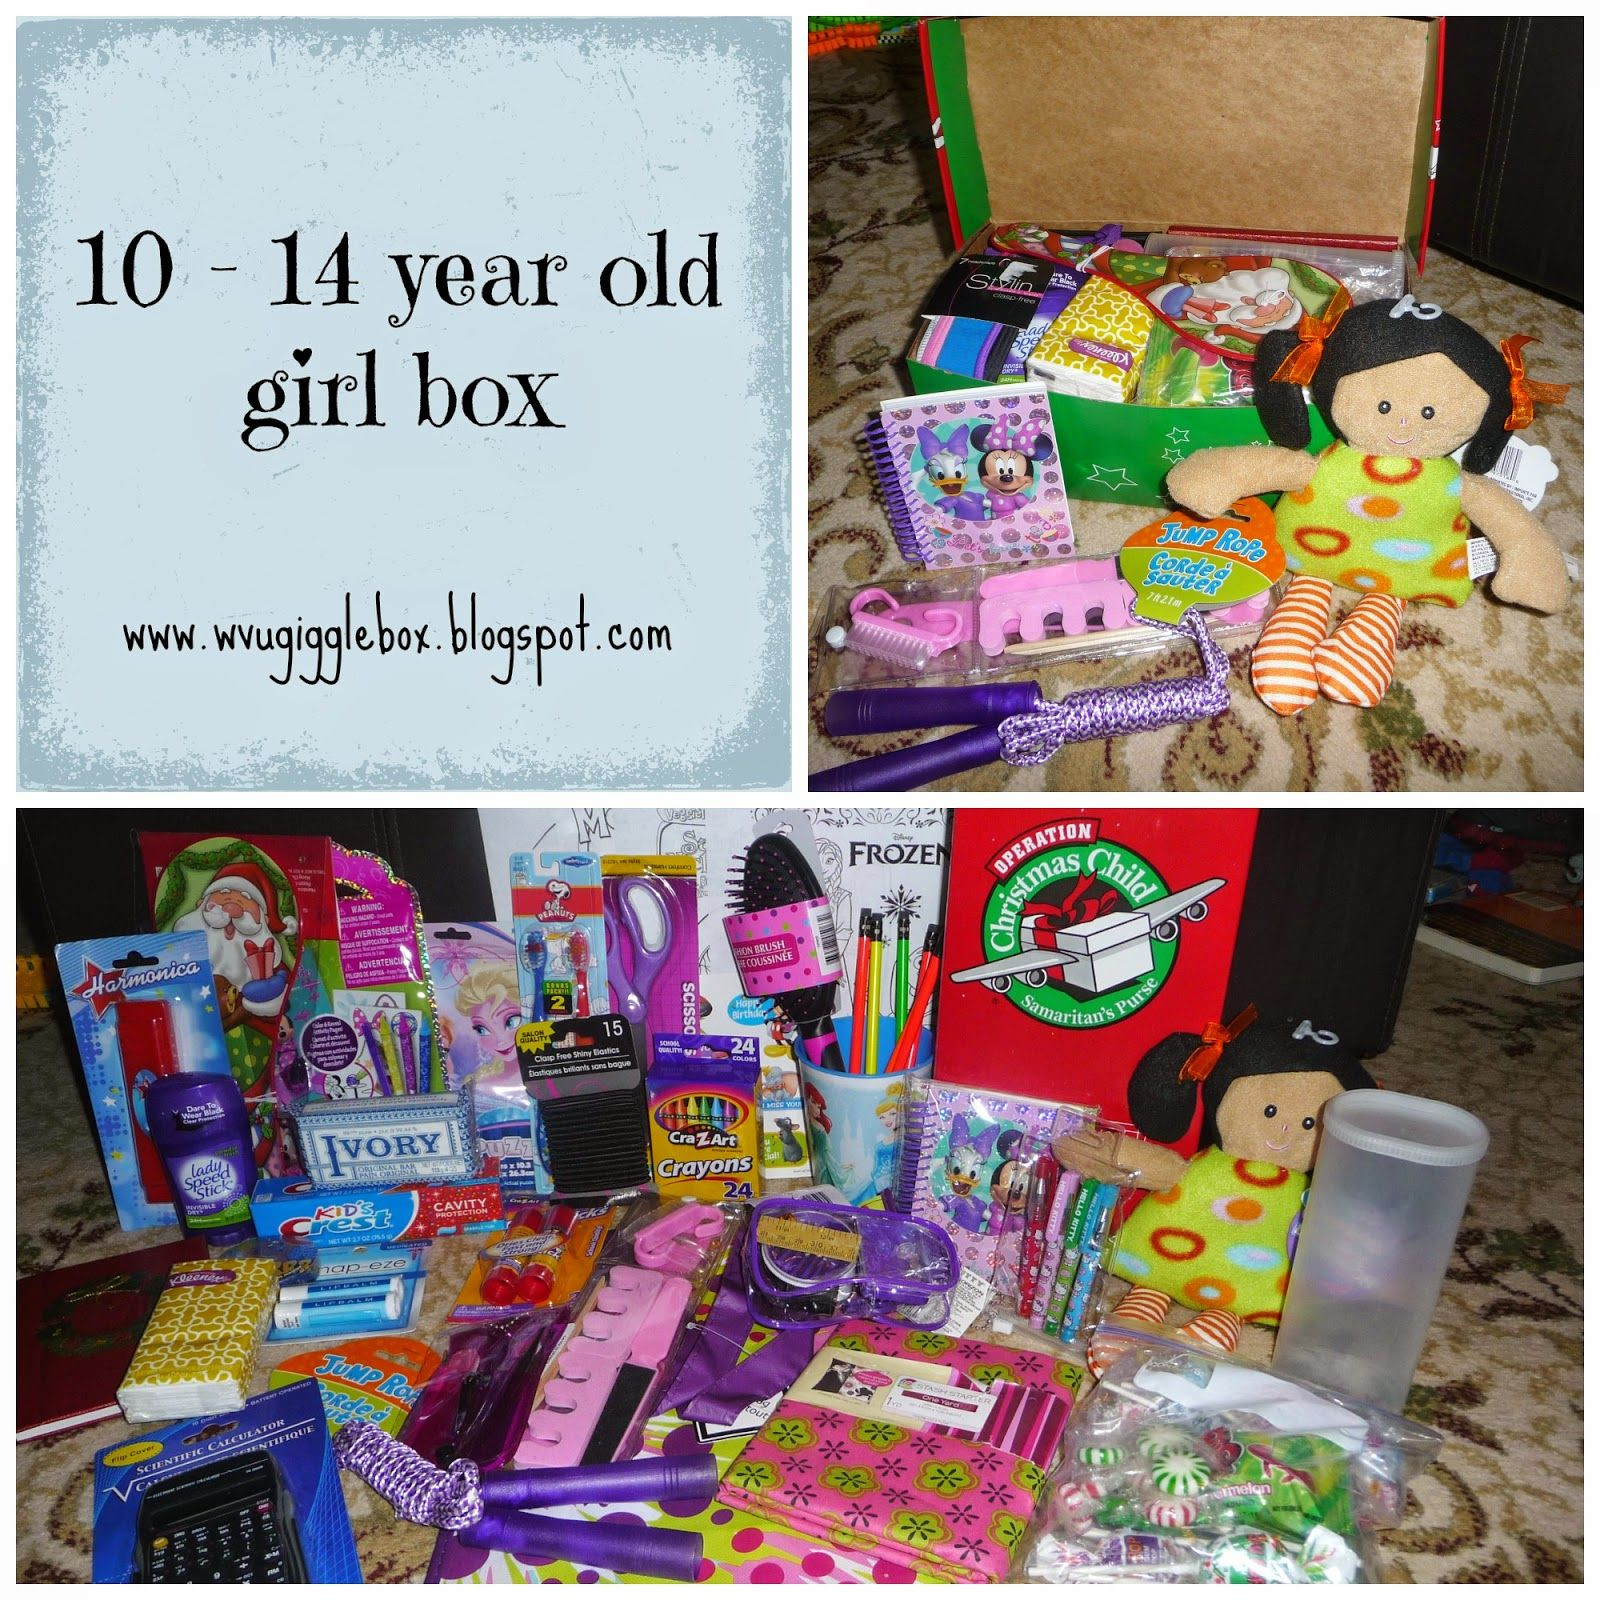 Gift Ideas For 14 Year Old Girls
 Operation Christmas Child 2014 packing a 10 14 year